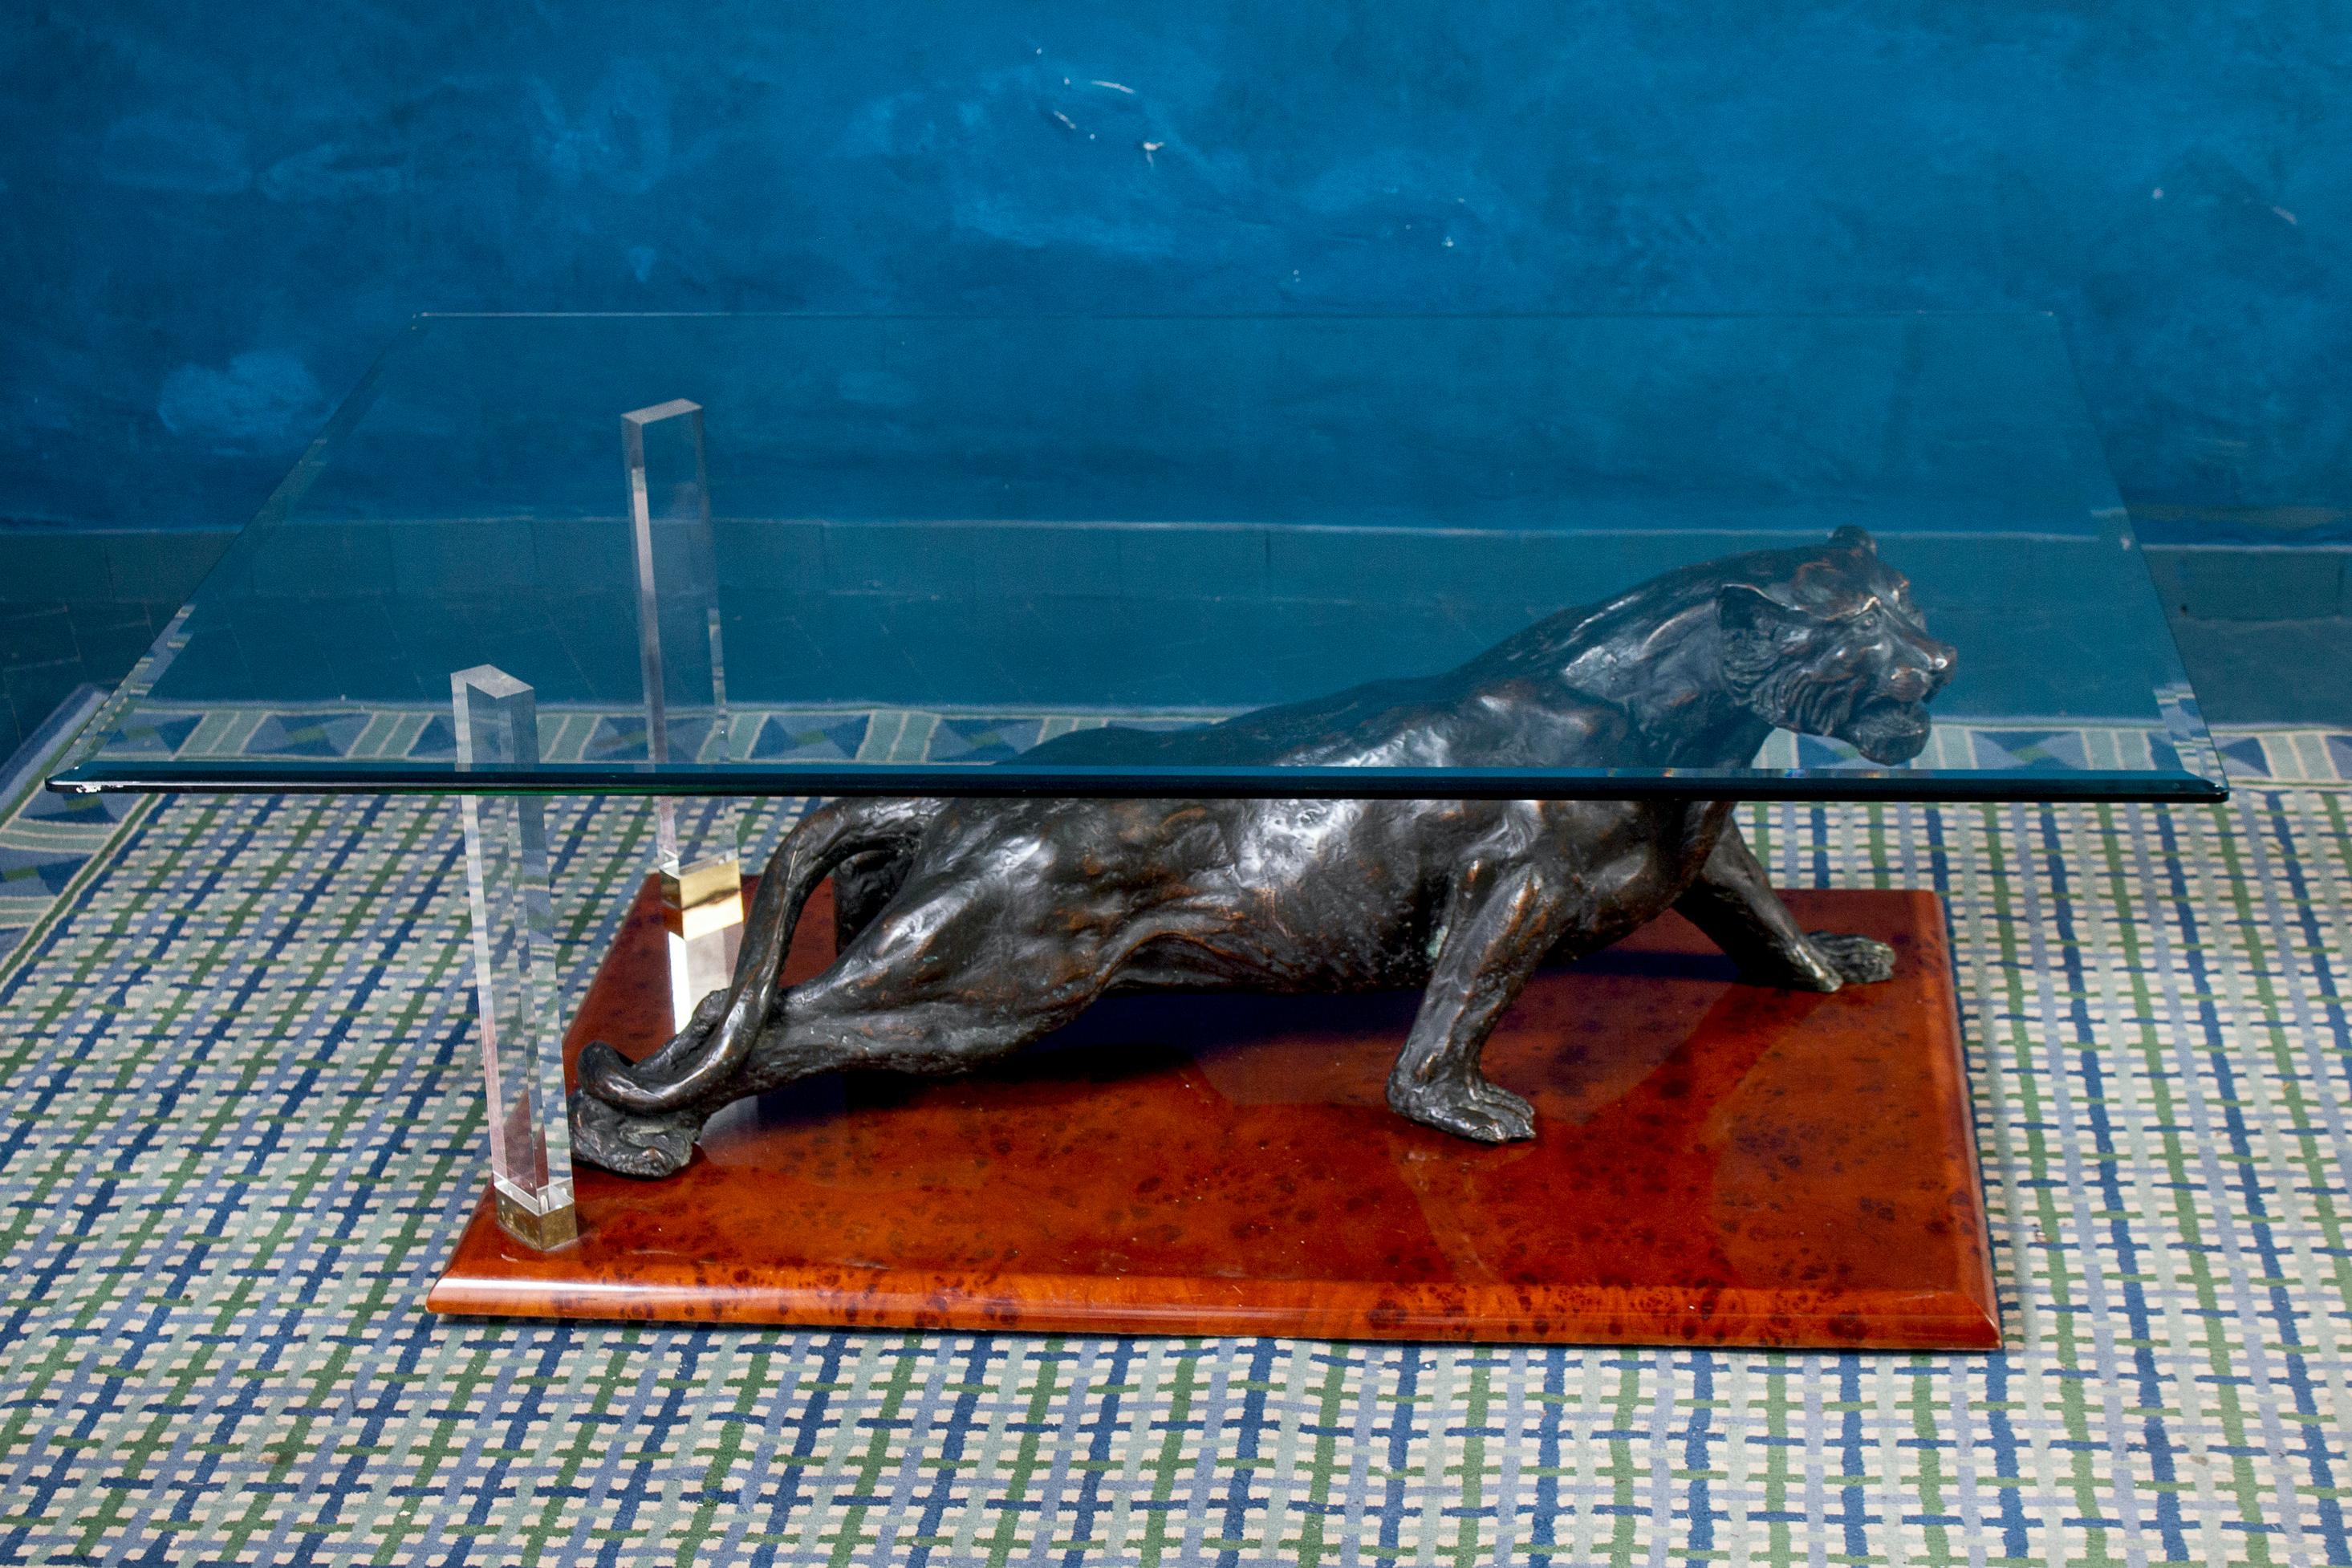 Unusual and rare 1970s Italian coffee table with a black sculpture of panther on a wood base and a clear rectangular glass top.

